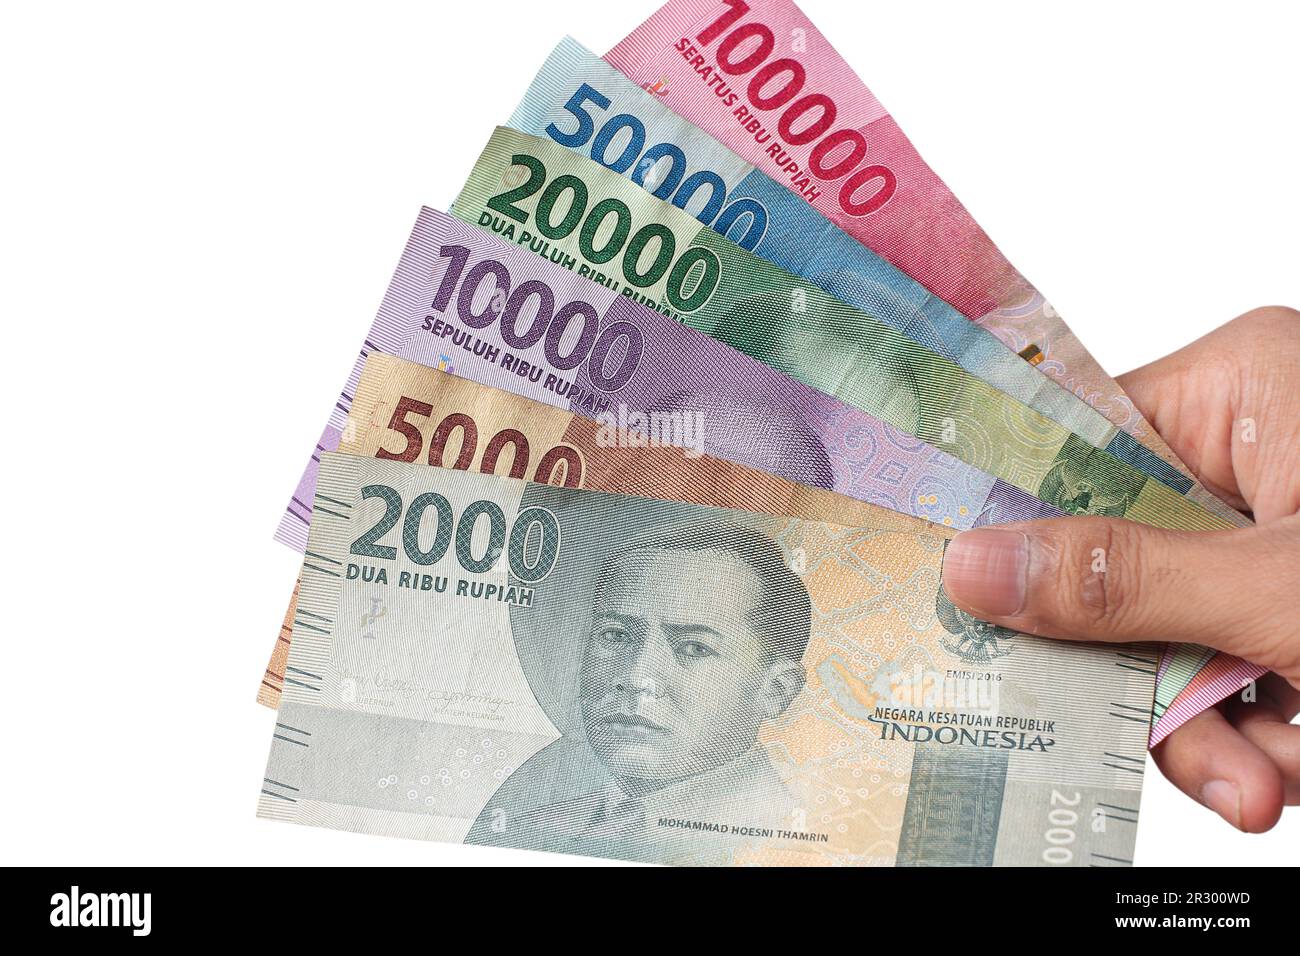 man's hand holding Indonesian rupiah banknotes Stock Photo